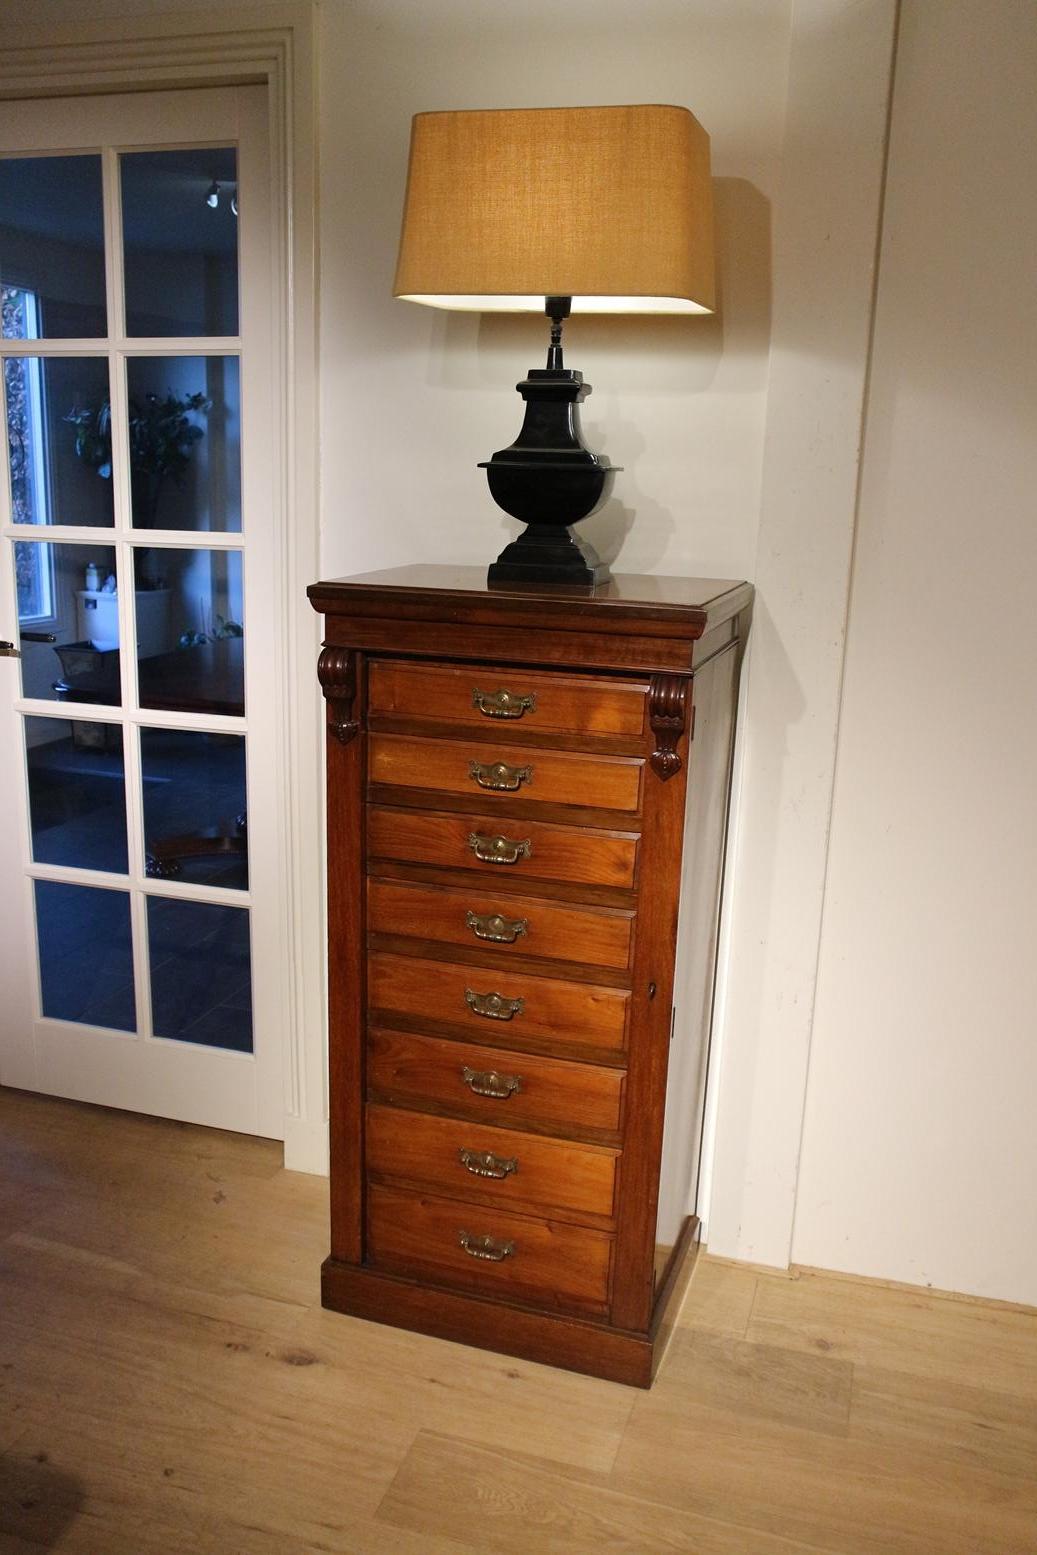 This a good example of a high quality Wellington chest of drawers. It is in a perfect condition and , very important, original condition. It has a warm patina from 140 years of being used. We have checked the chest to make sure it is in perfect